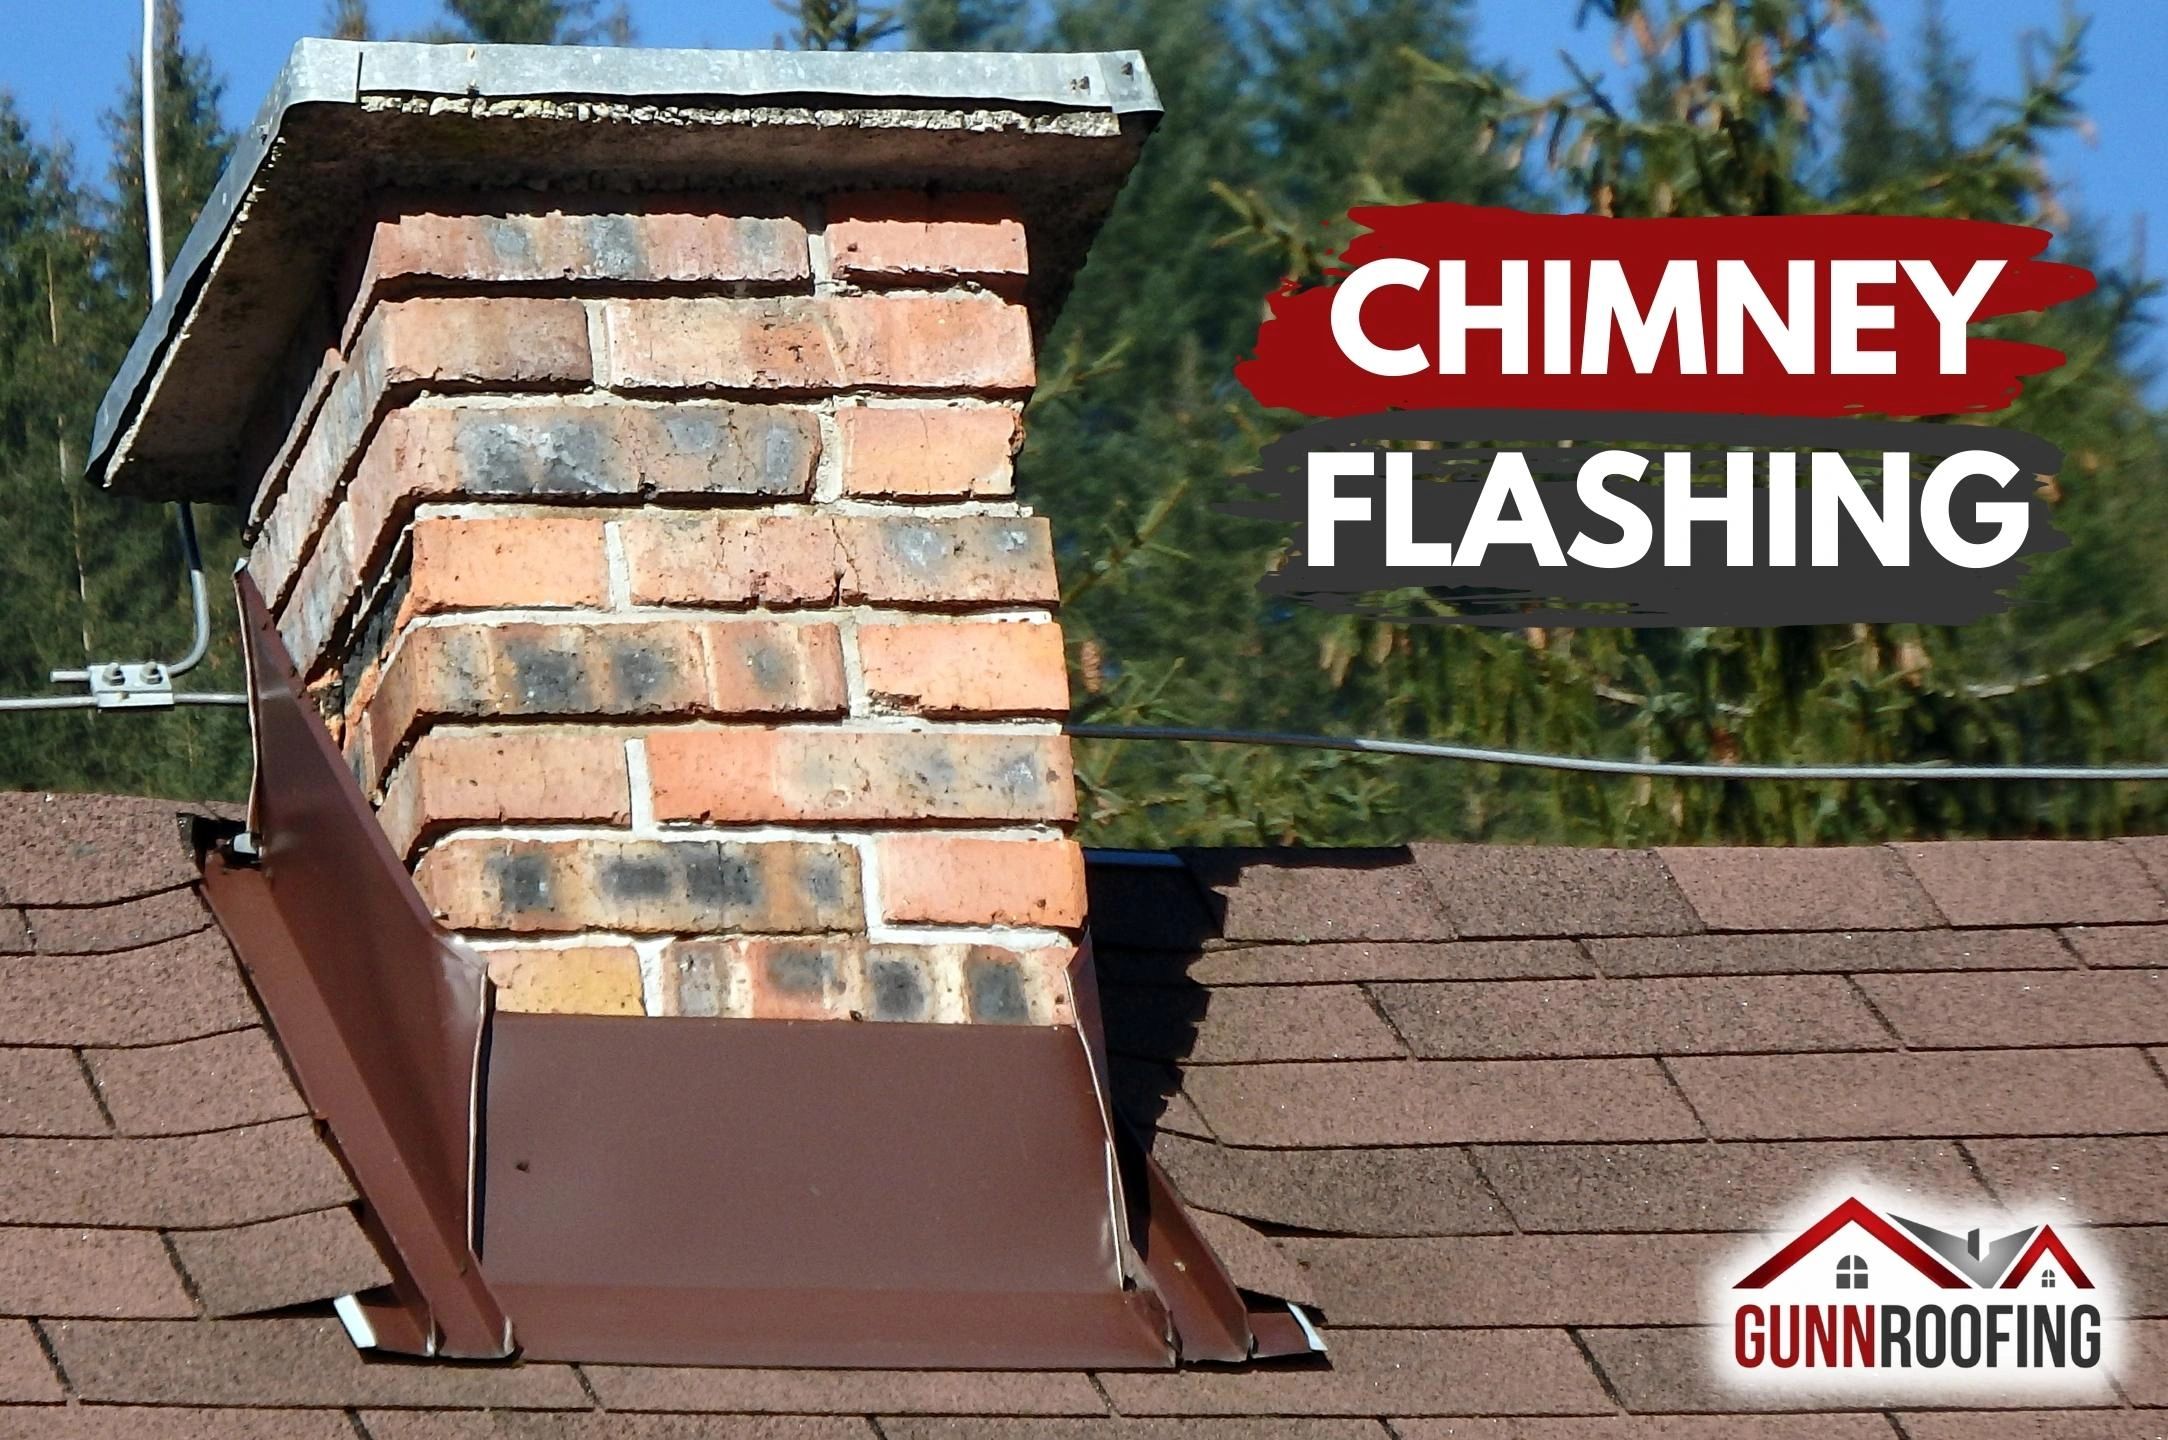 Leaking around your Chimney? Flashing may be the issue